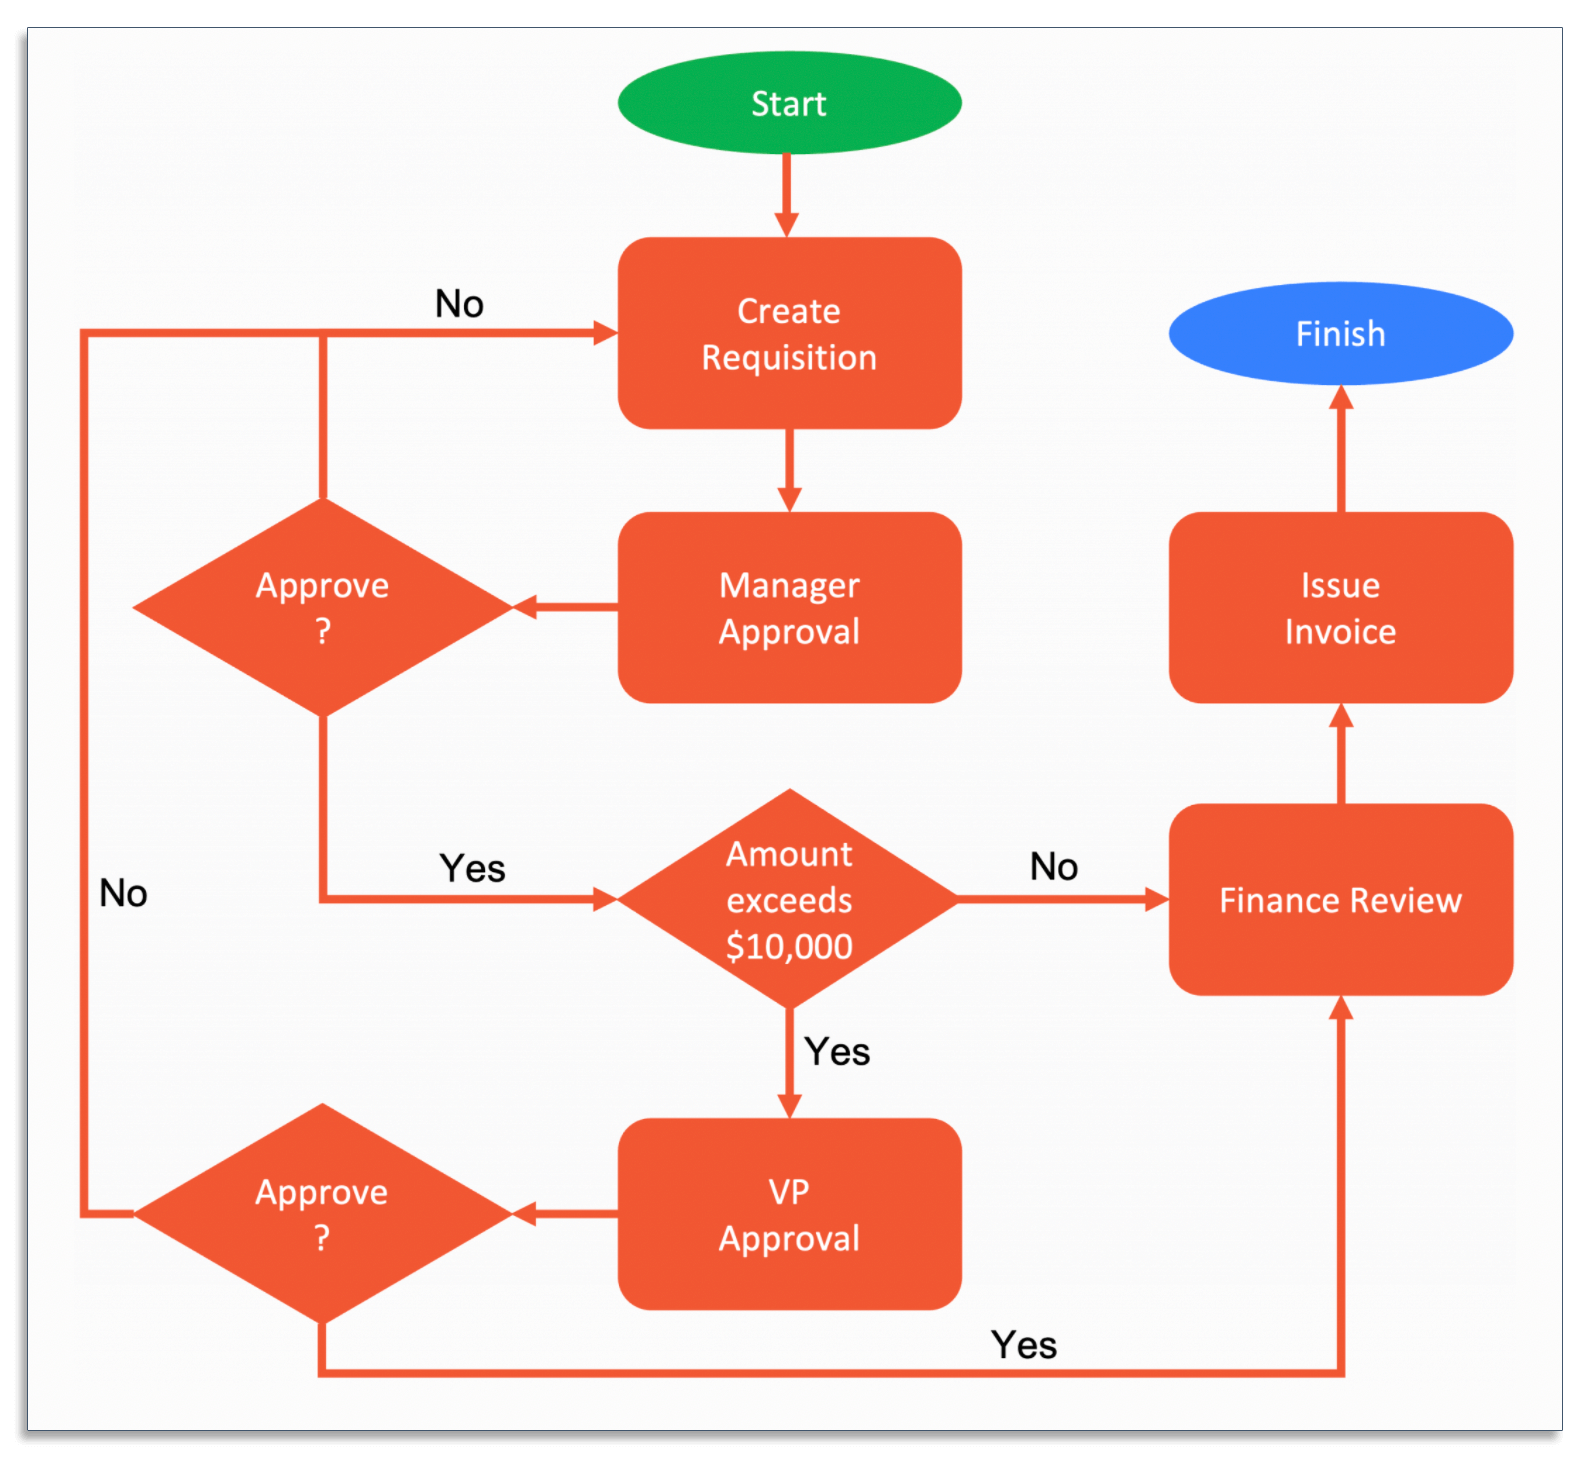 Example of Business Process Diagram